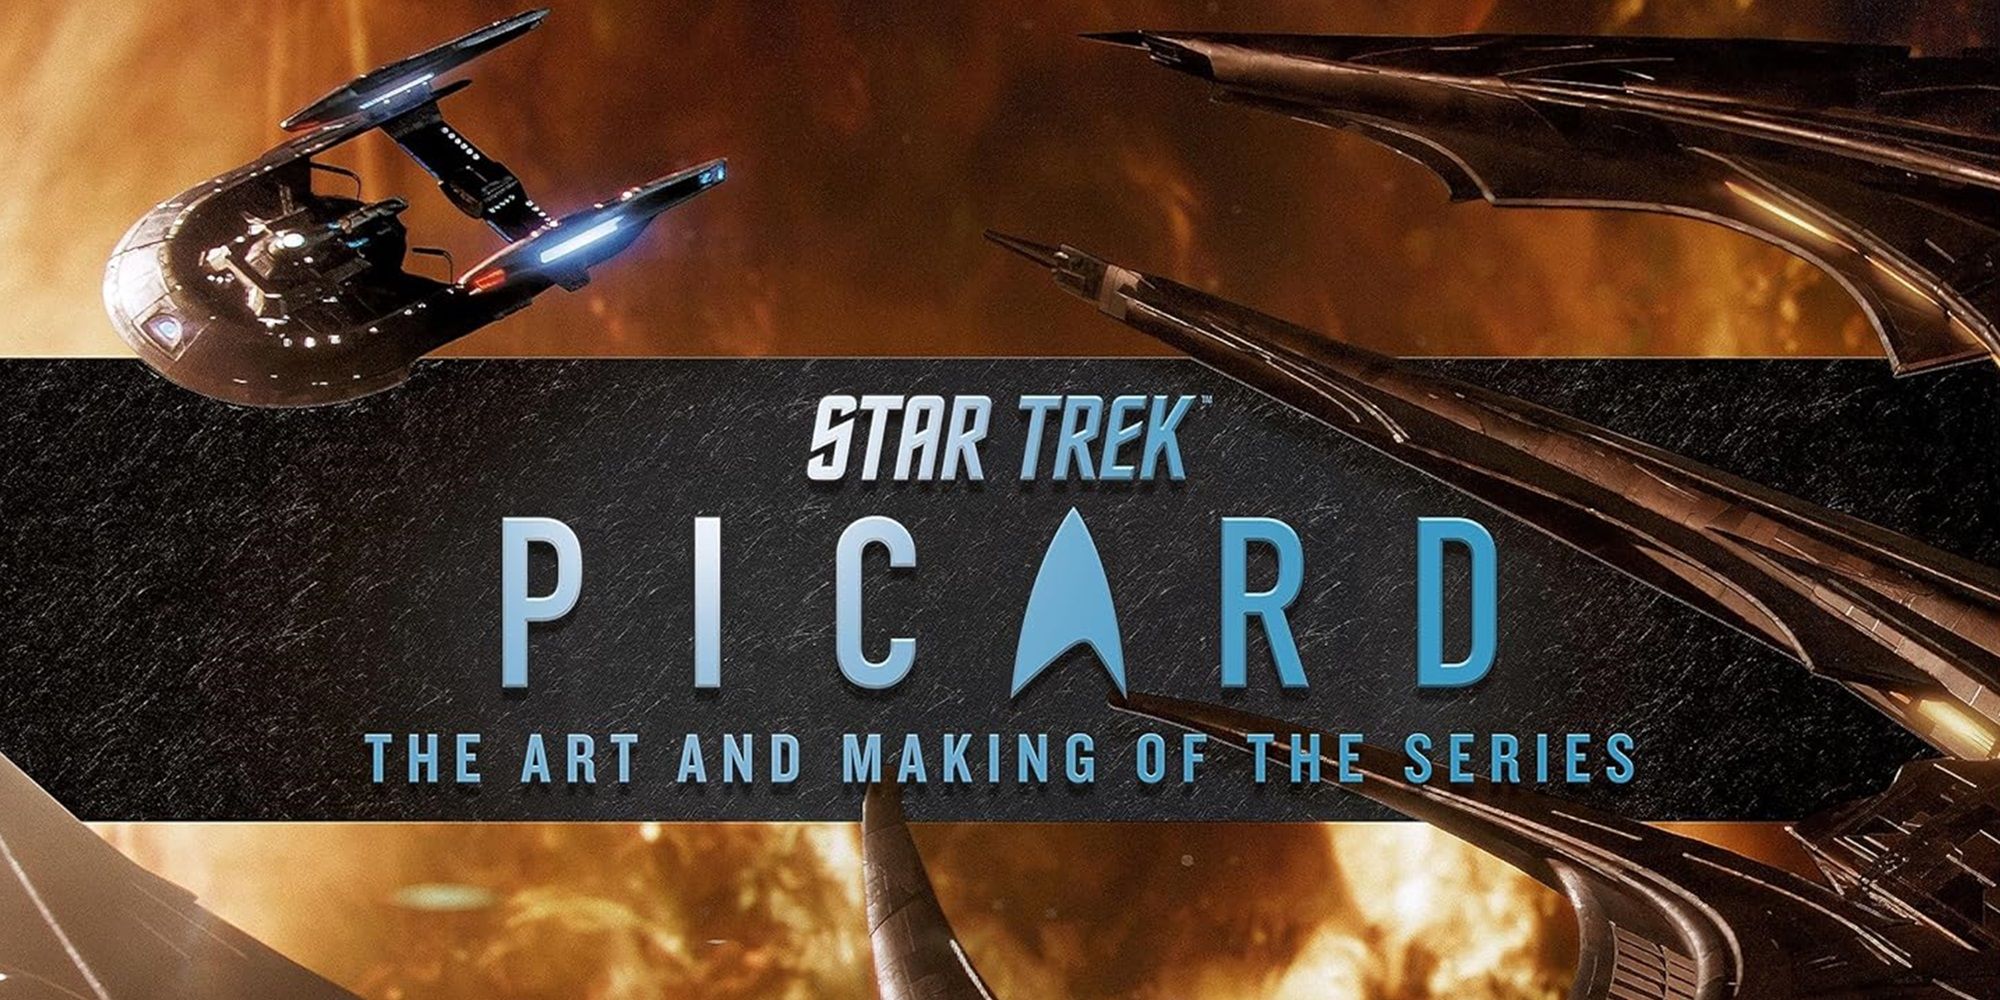 The Art of Star Trek Picard cover feature image